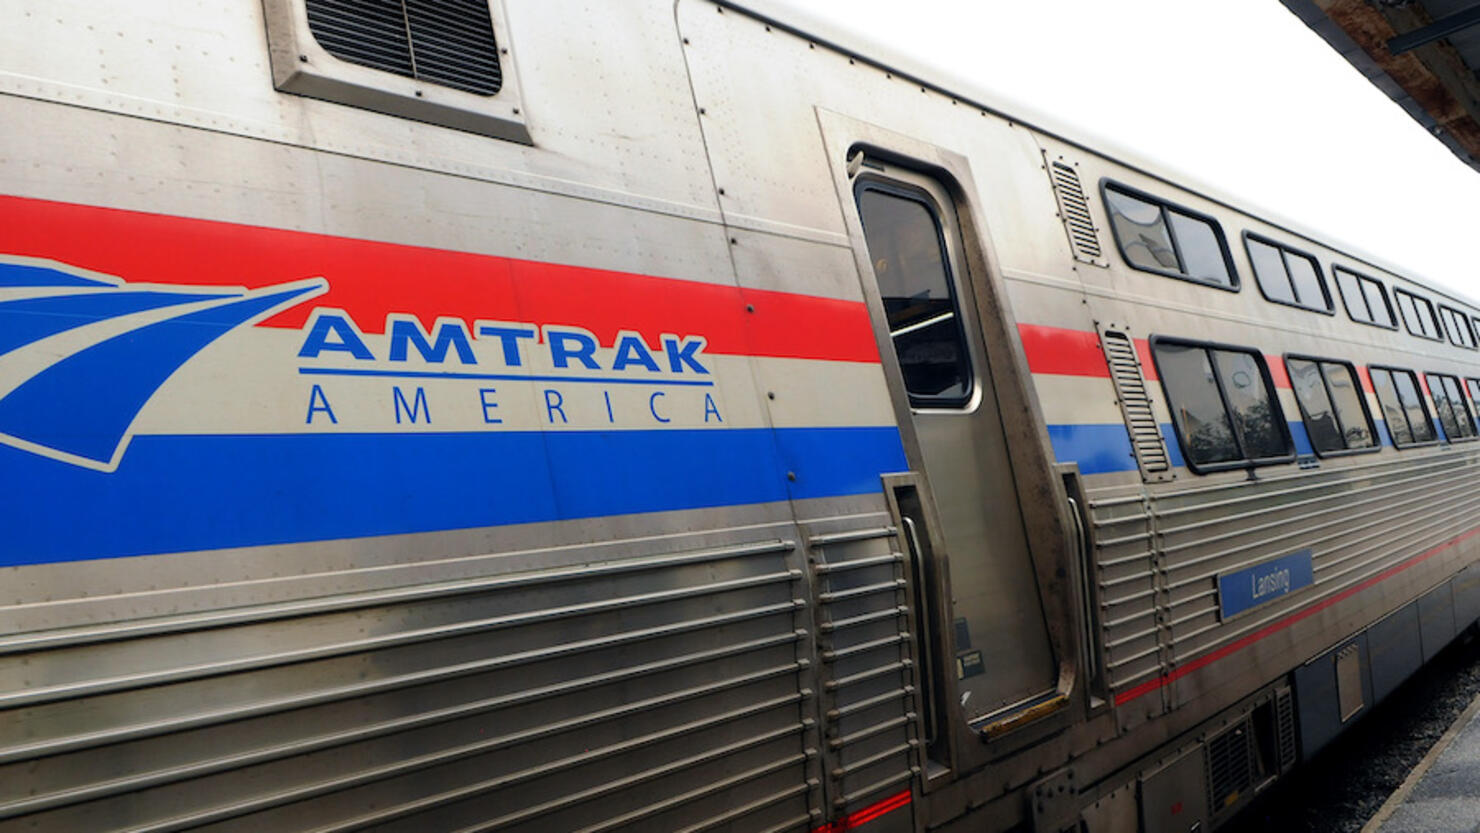 Amtrak Reduces Service Due To Covid-19 Pandemic